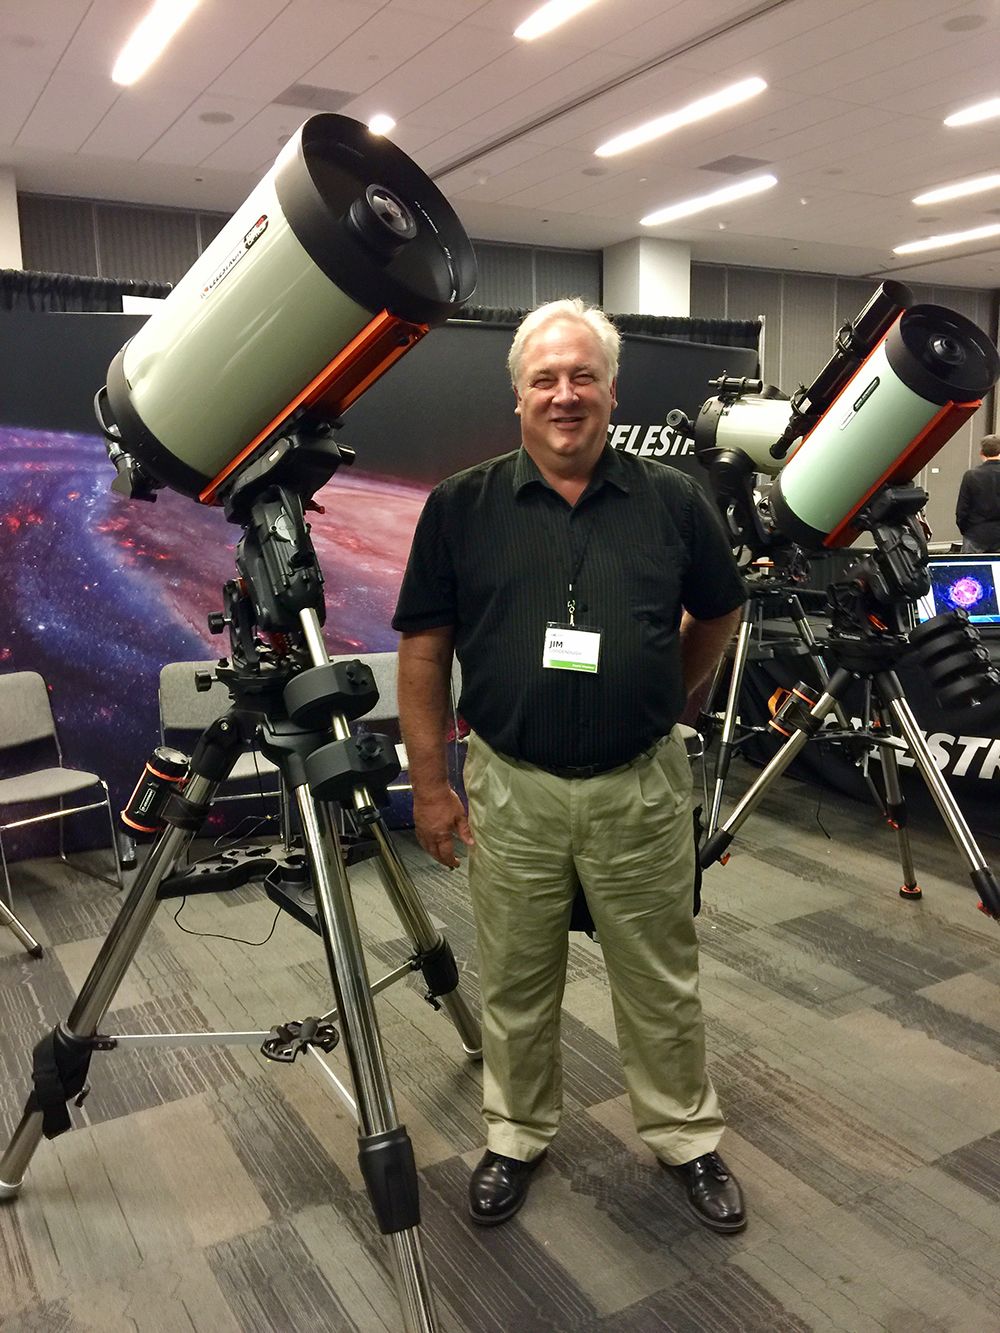  Jim in the Celestron booth.